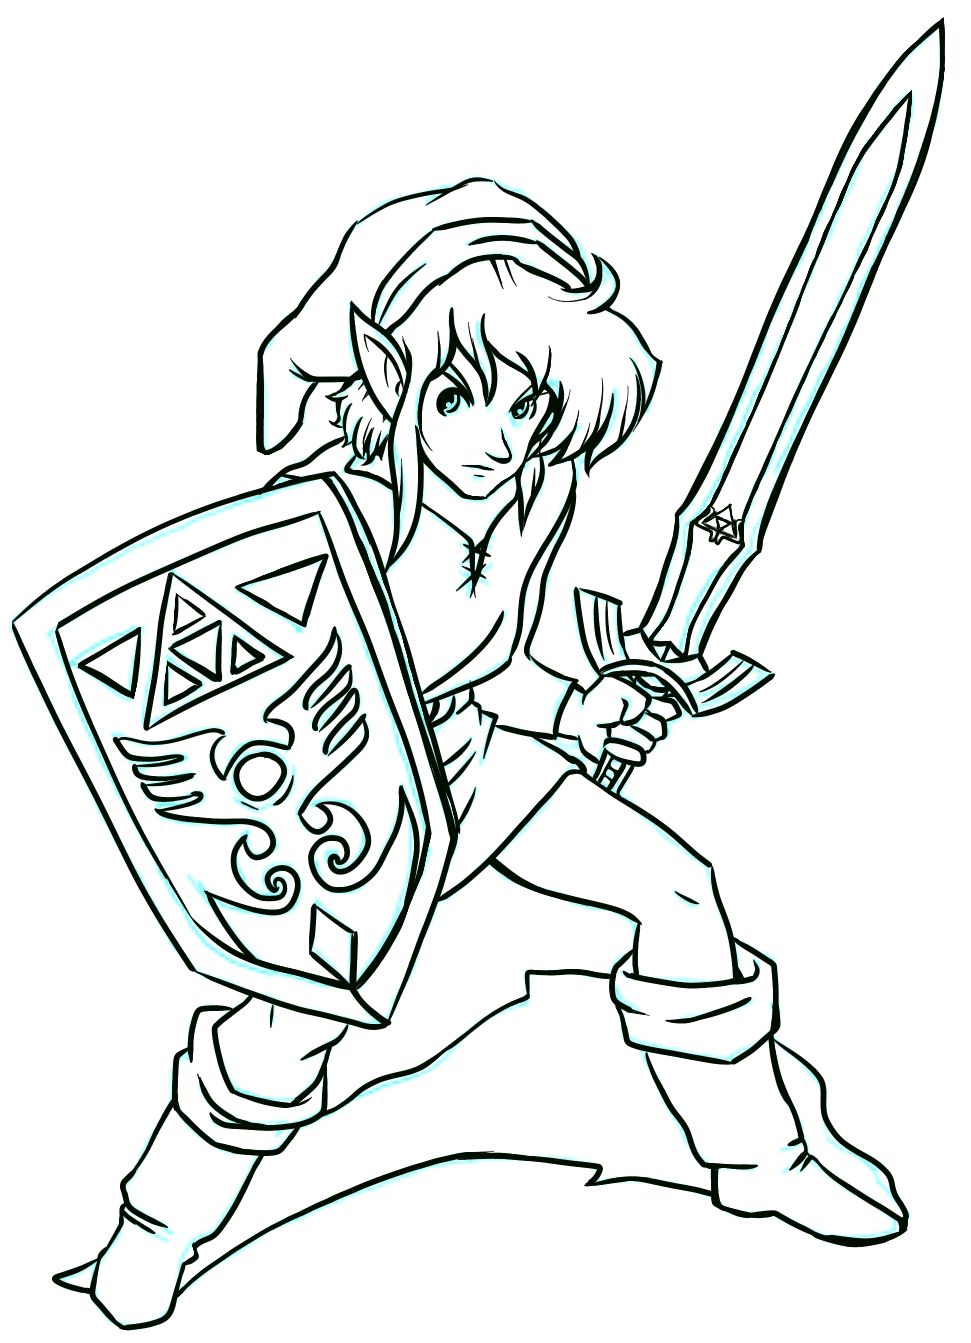 Printable link coloring pages pdf